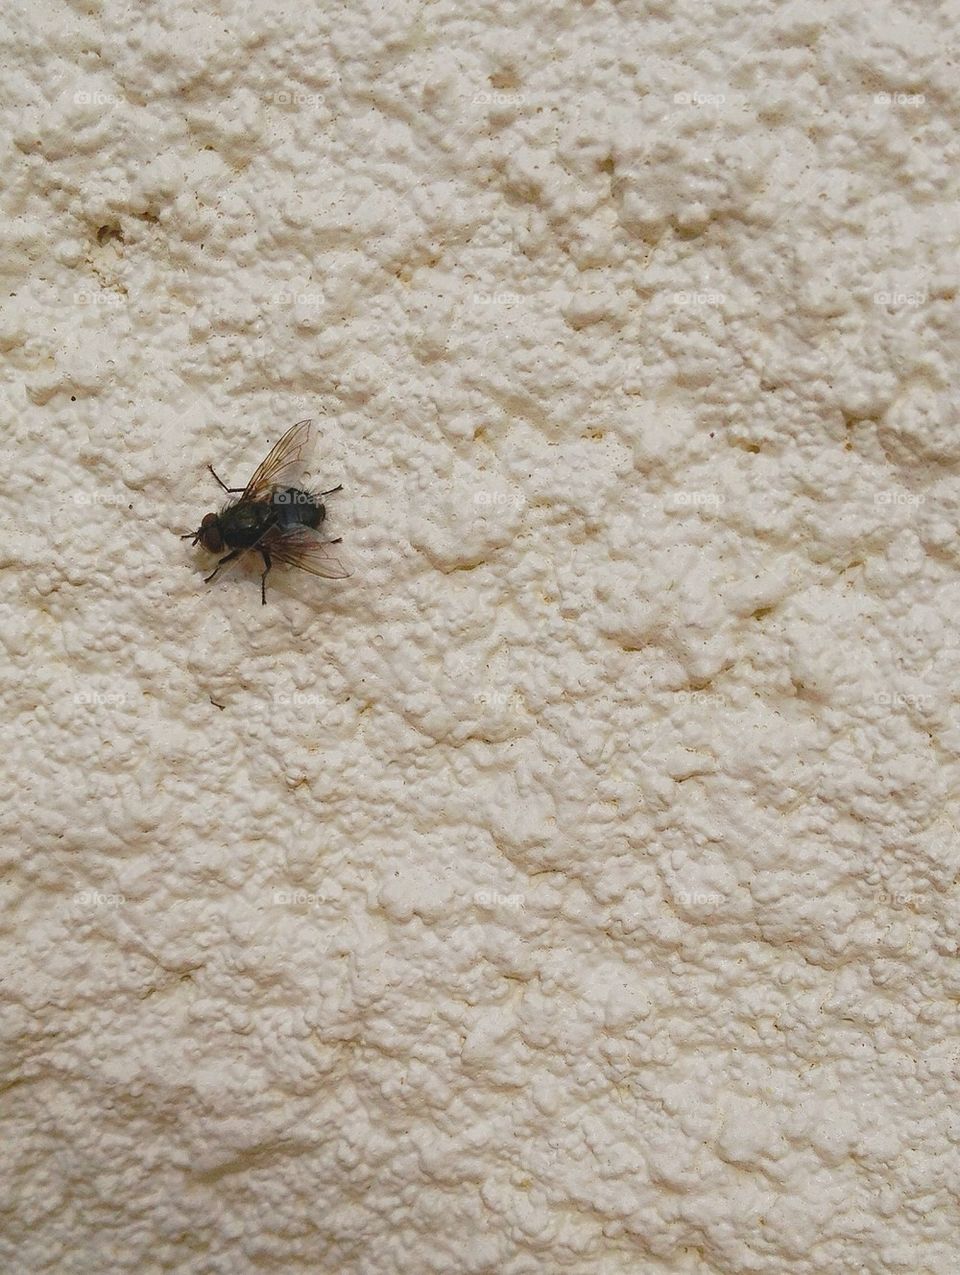 I would have loved to been a fly on the wall...